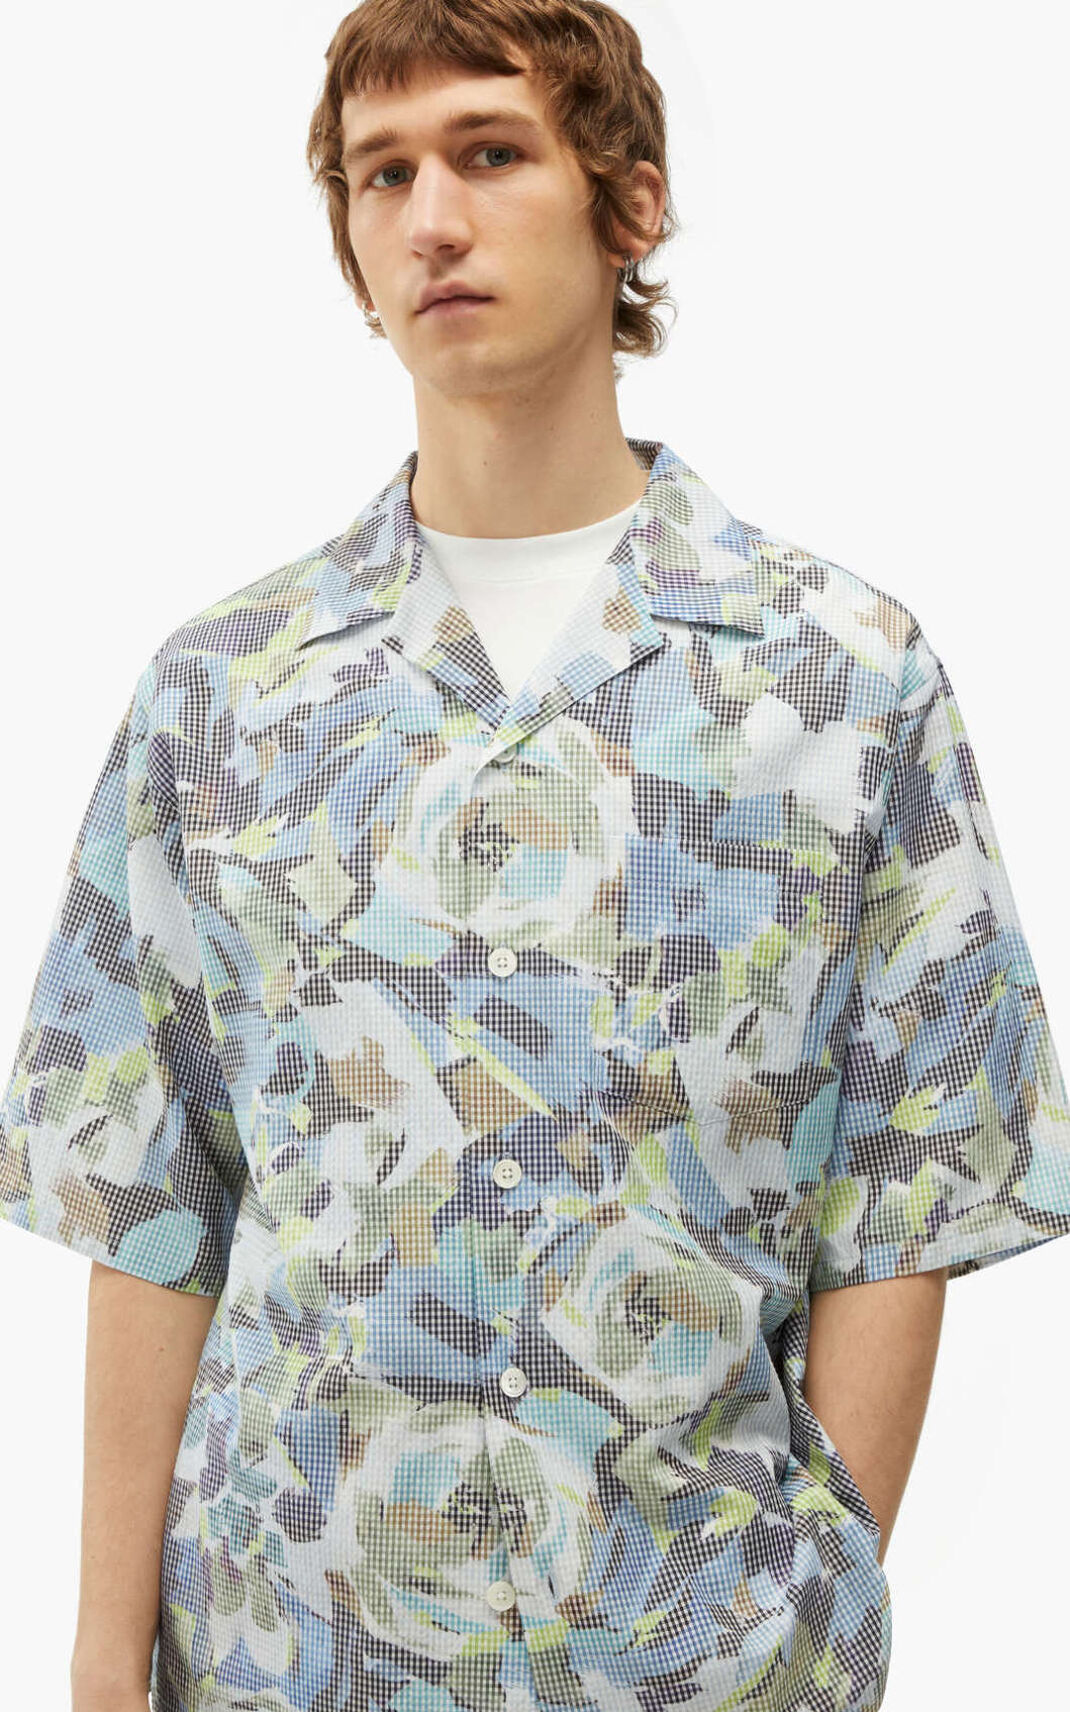 Kenzo Casual Archive Floral Shirt Blue For Mens 7415PMQCZ